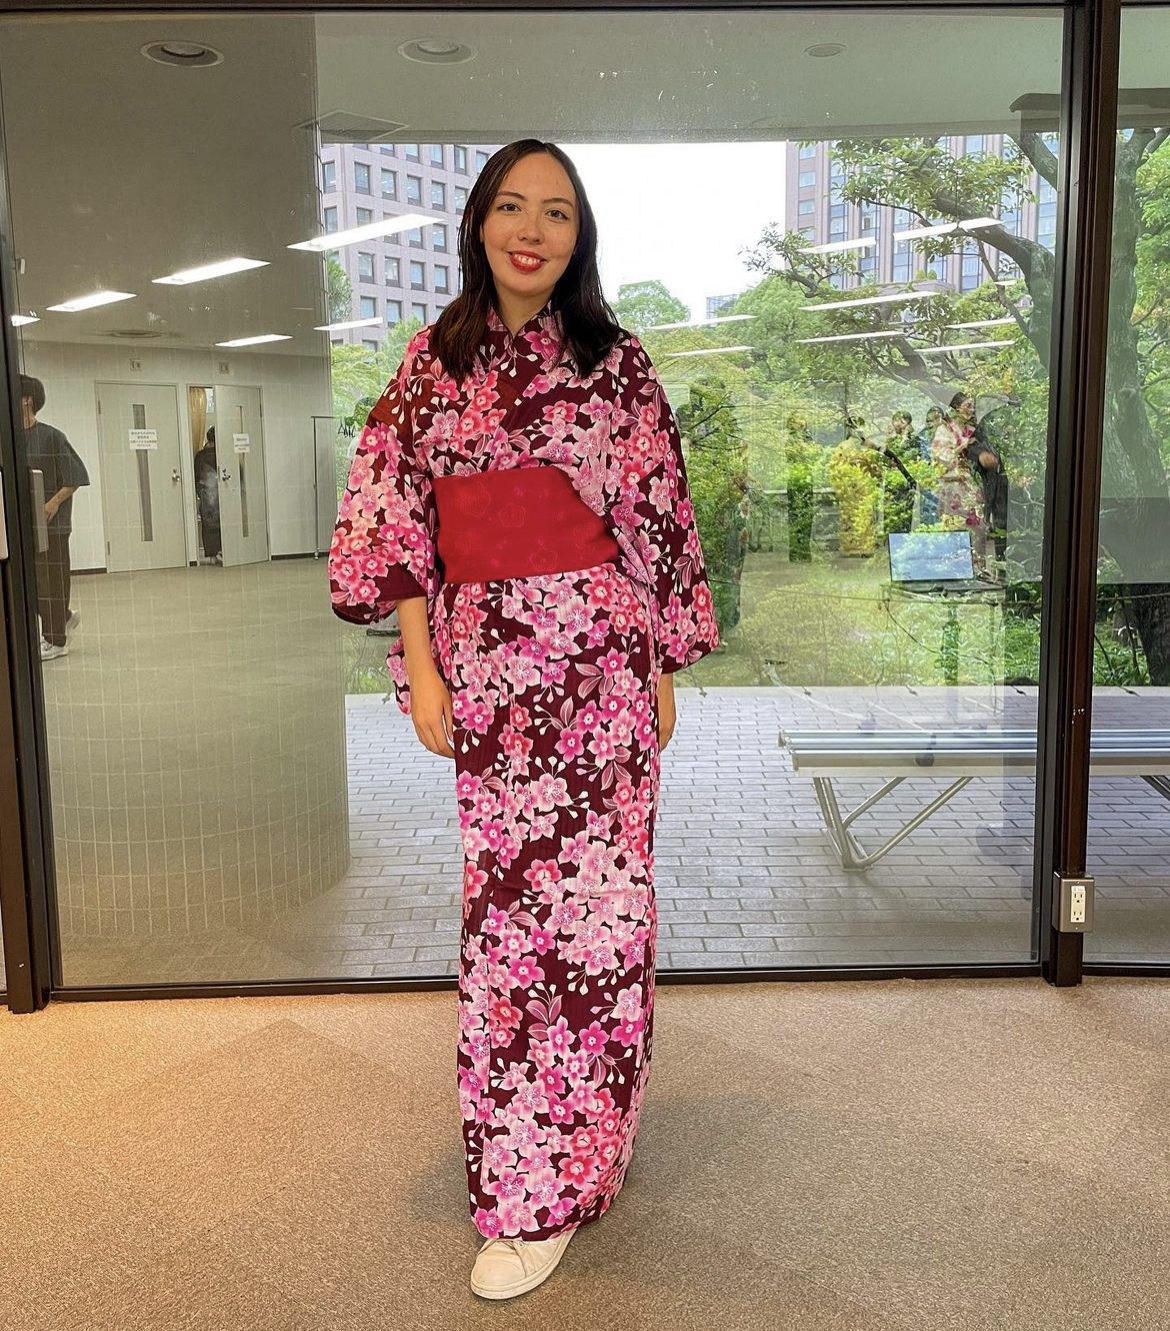 Aoife wearing a yukata with a pink floral design